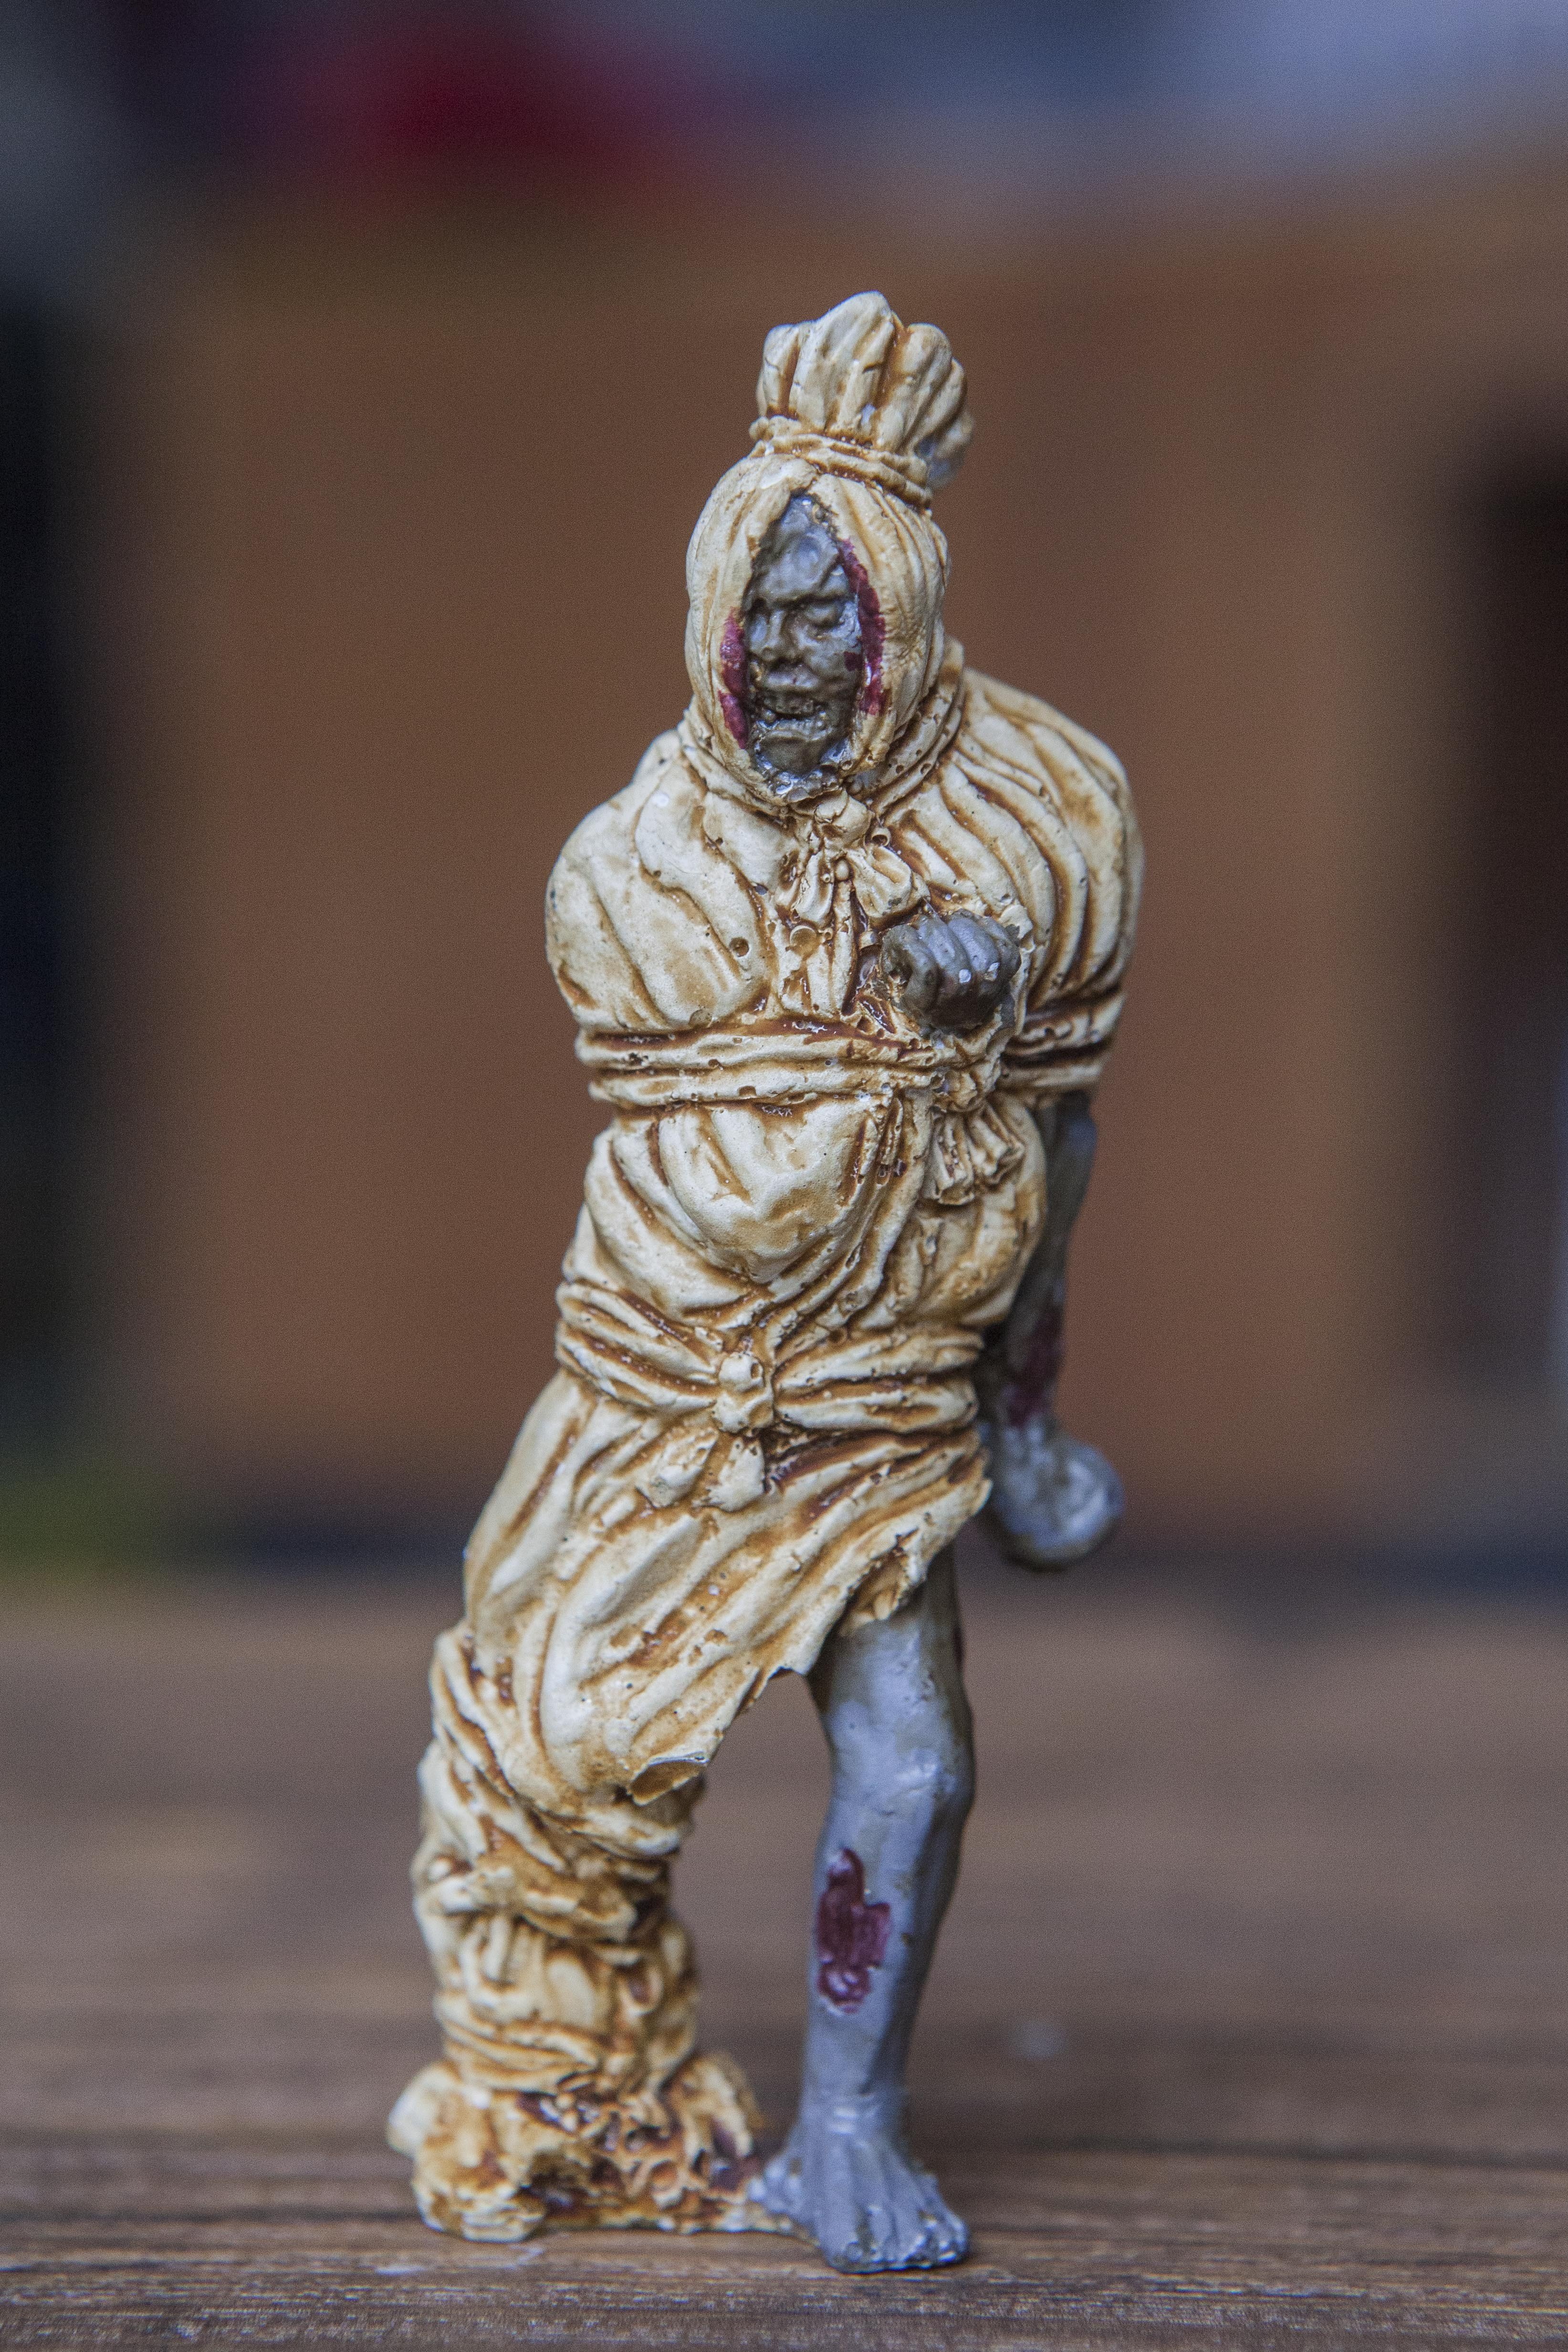 A figurine of a dead body wrapped in a shroud, made by GoodGuysNeverWin. Photo: Agoes Rudianto